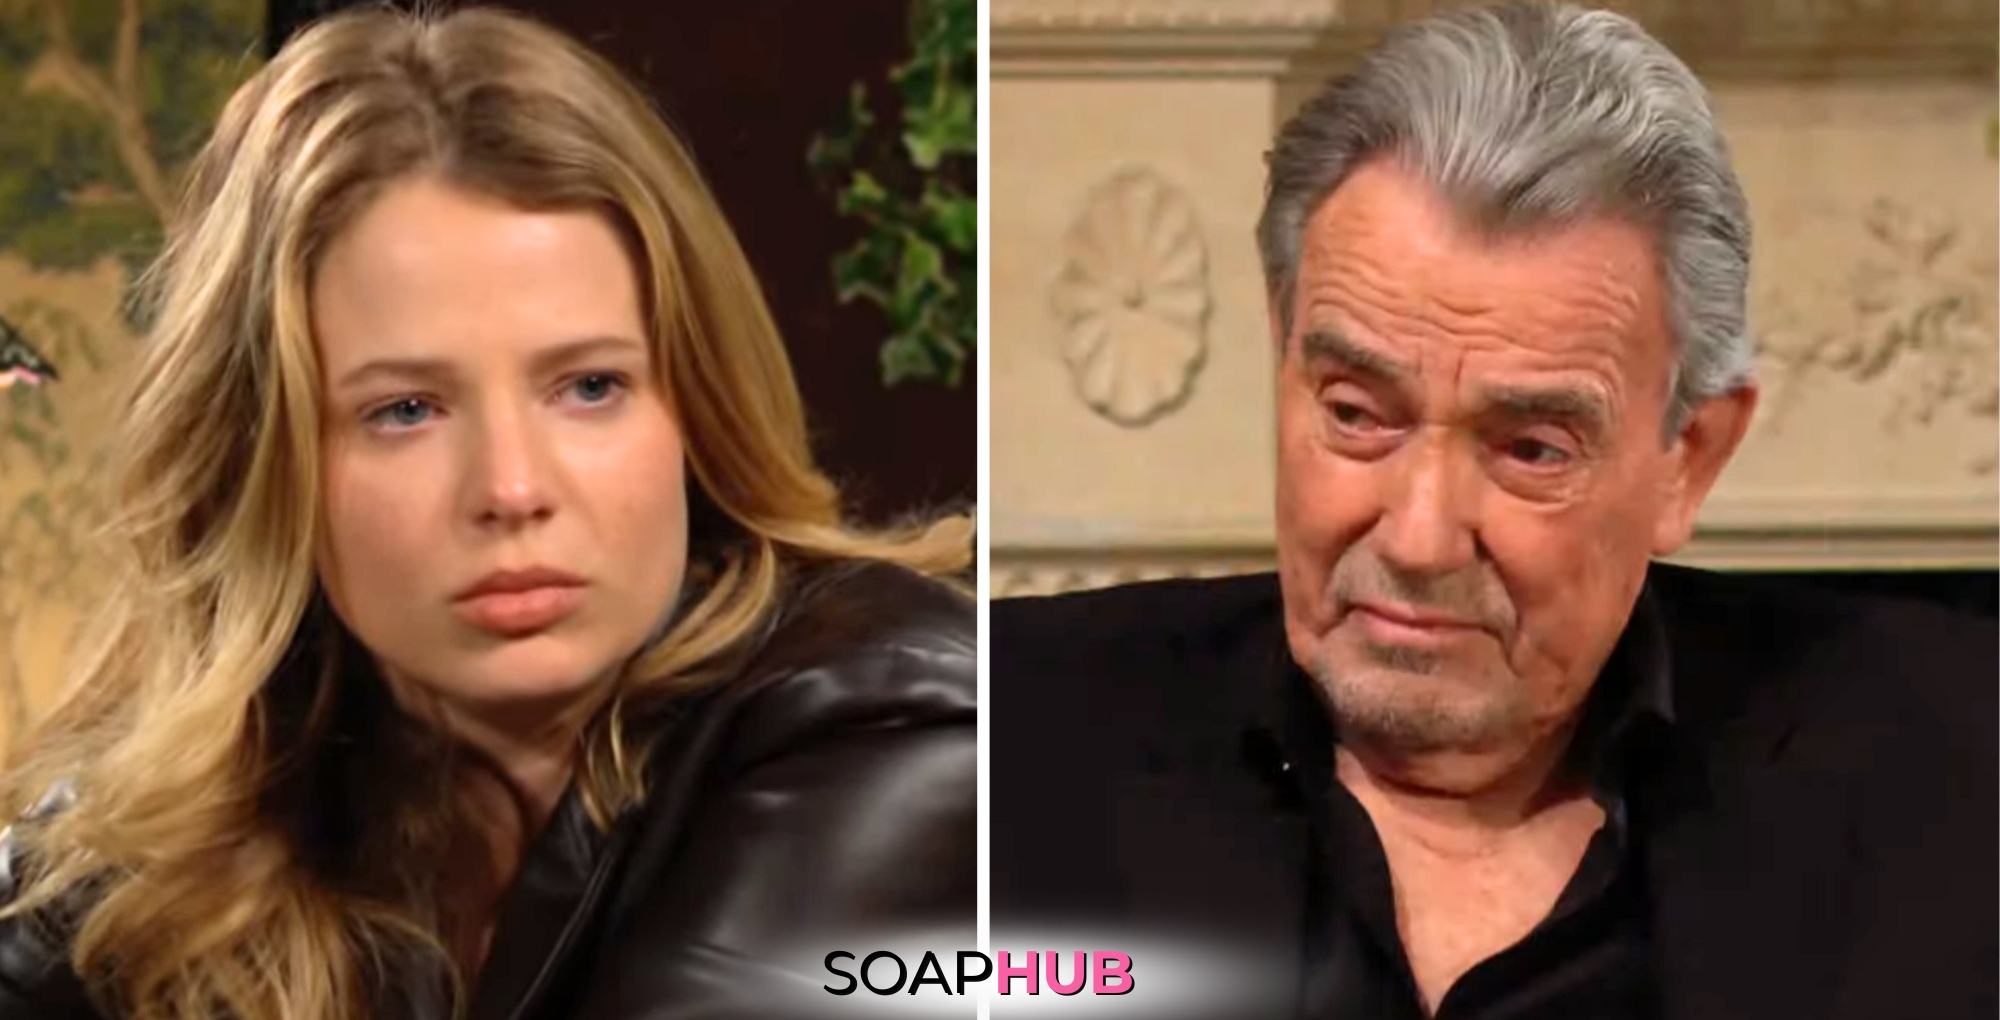 The Young and the Restless spoilers for April 29 feature Summer and Victor with the Soap Hub logo.